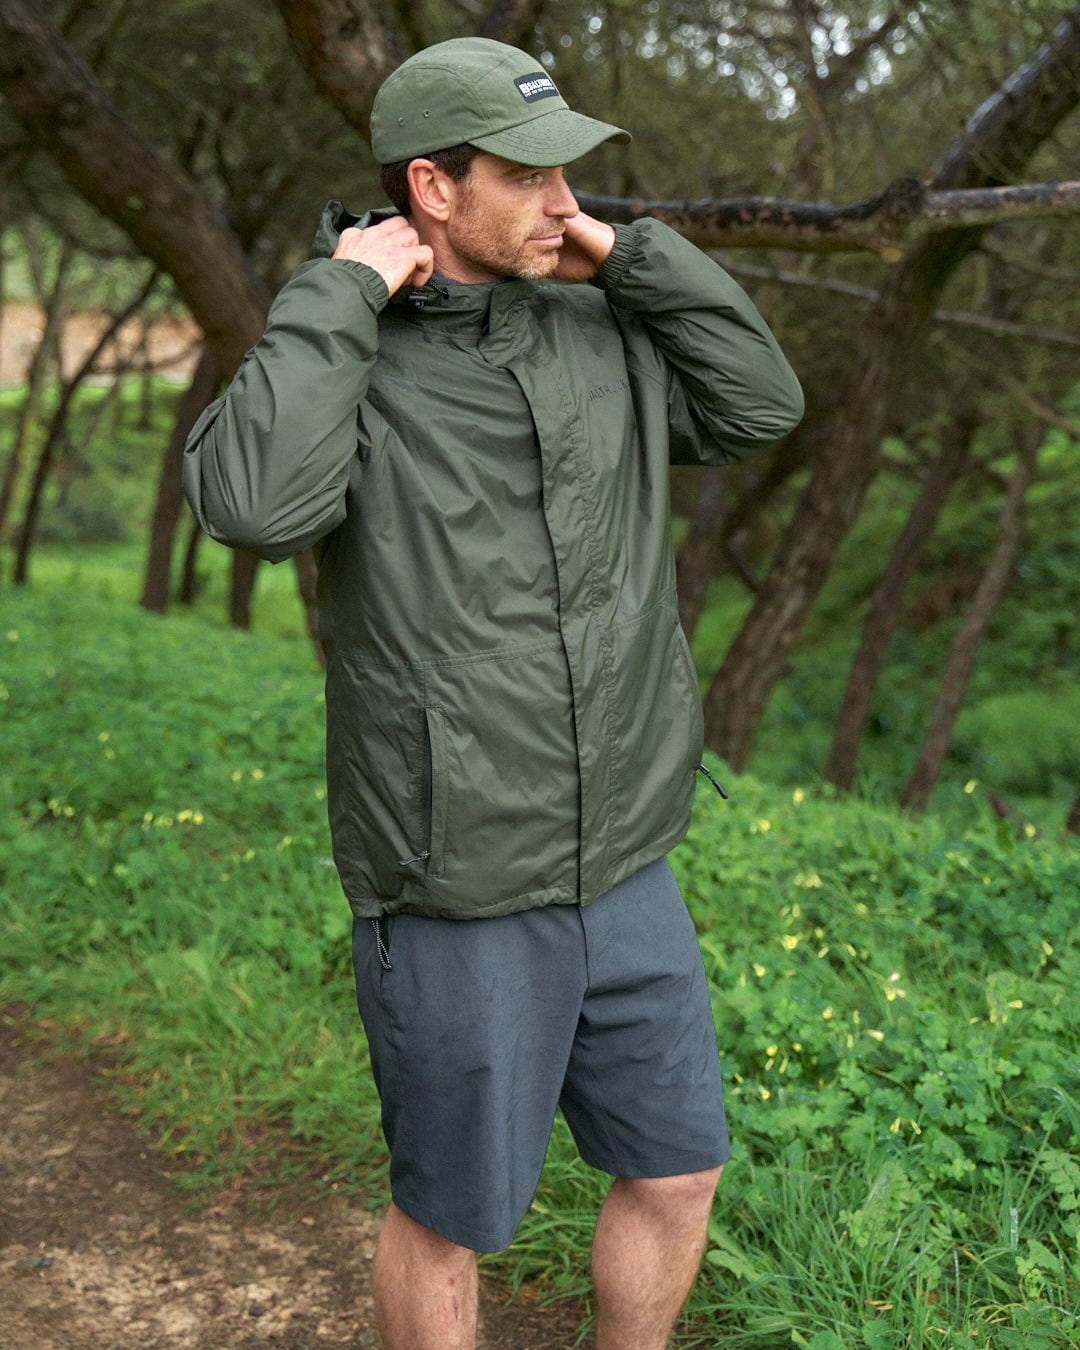 Man in a forest adjusting the hood of his Saltrock Rainier - Mens Packable Waterproof Jacket - Green, wearing a cap and shorts, with lush greenery and trees in the background.